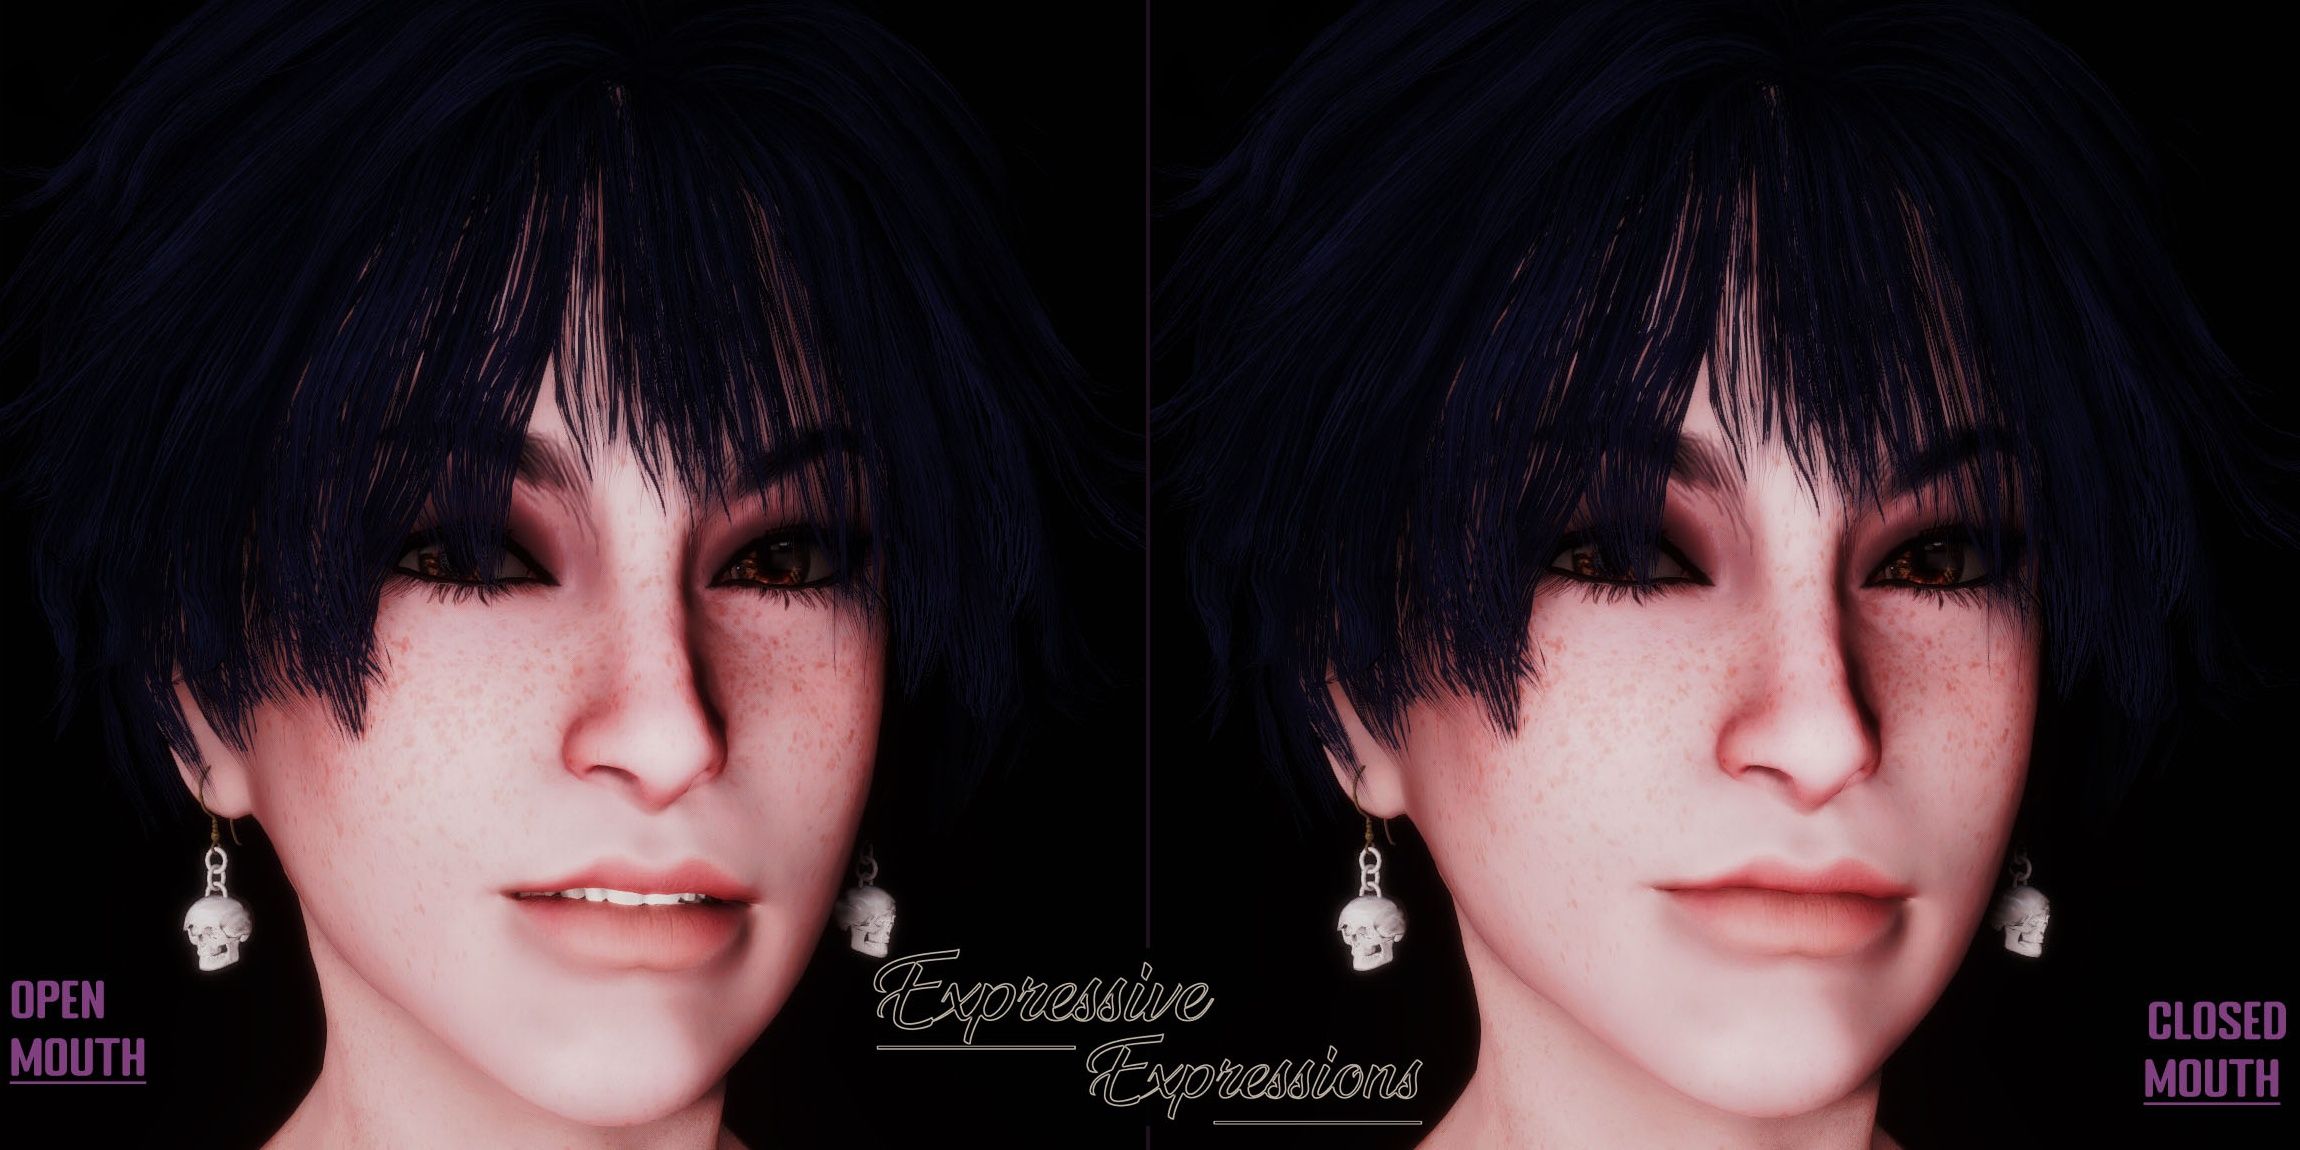 Expressive Expressions mod for Fallout 4